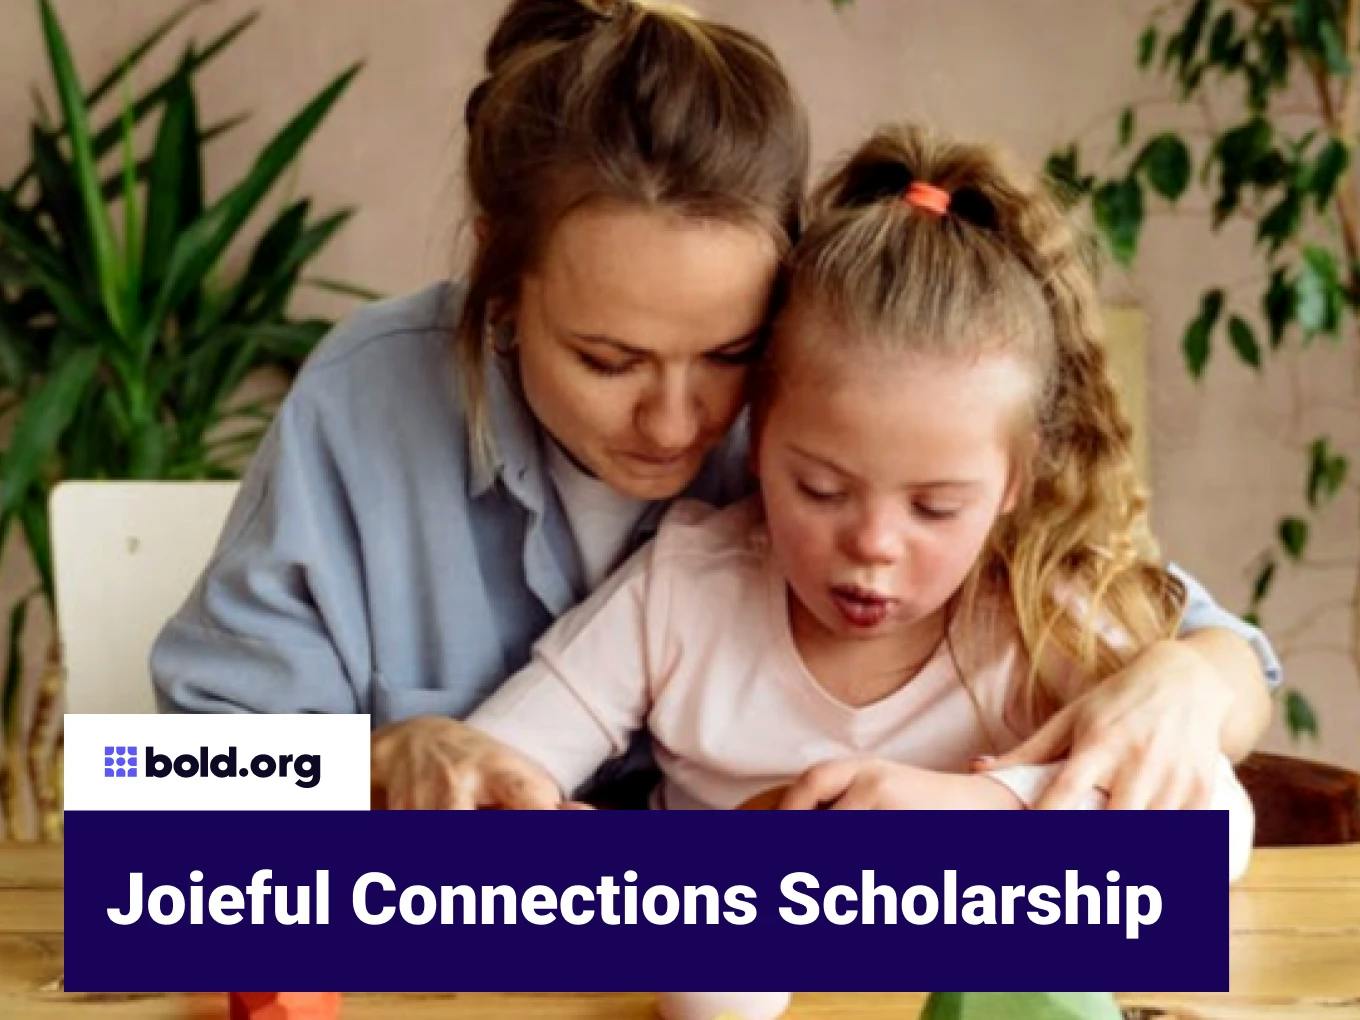 Joieful Connections Scholarship